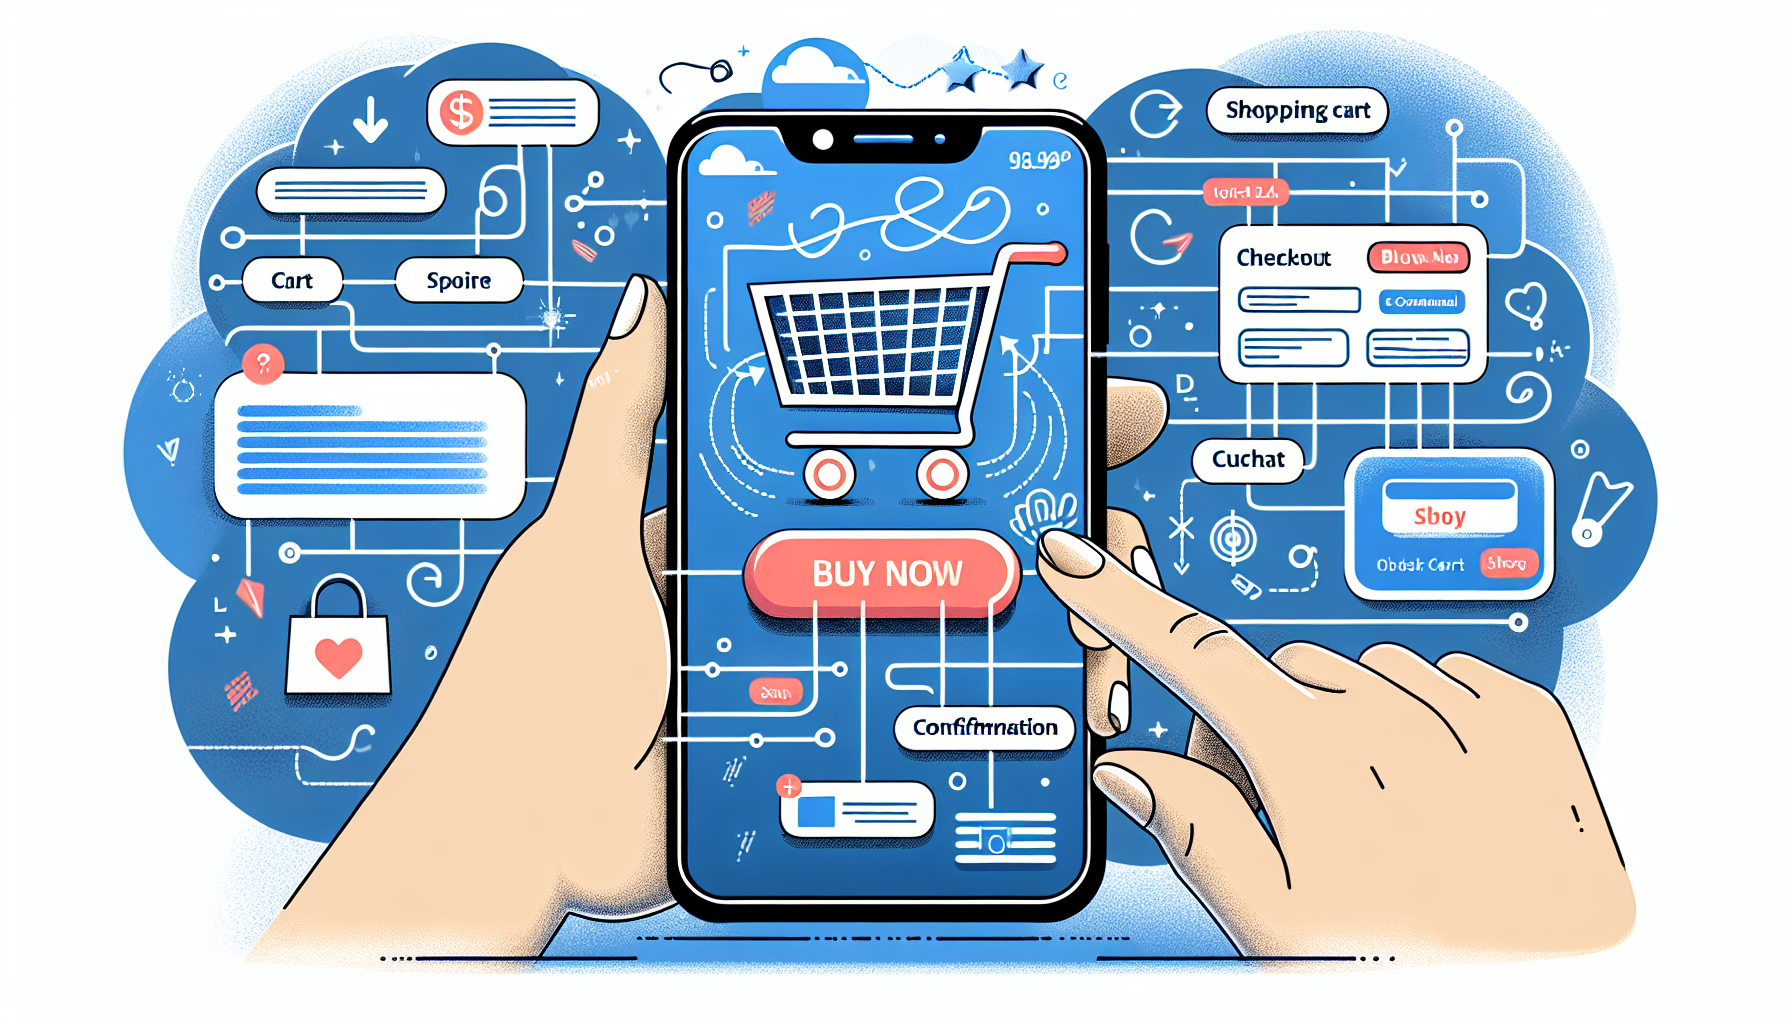 Illustration of a user-friendly ecommerce experience